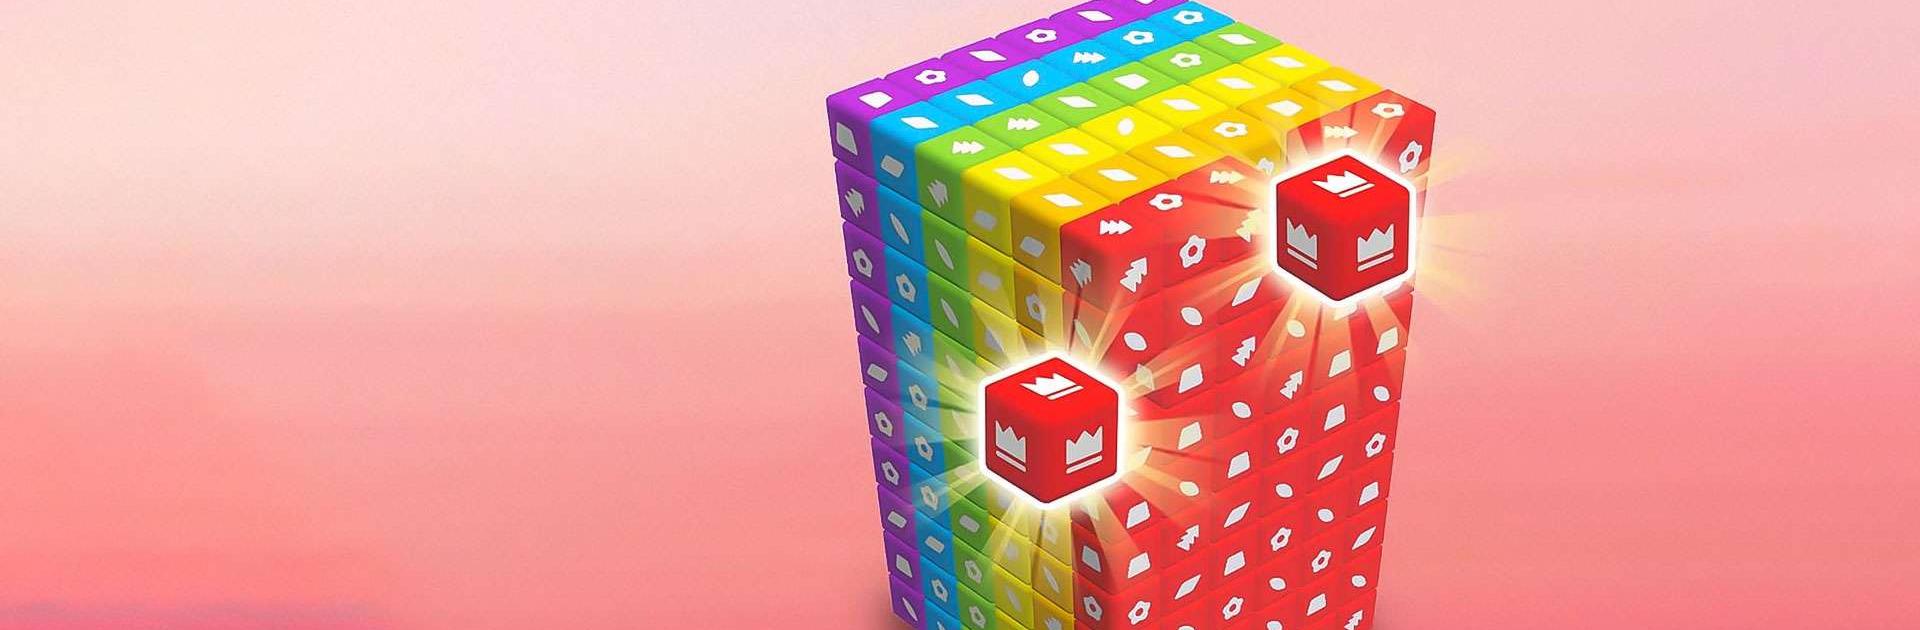 Cube Master: Pair Match Game